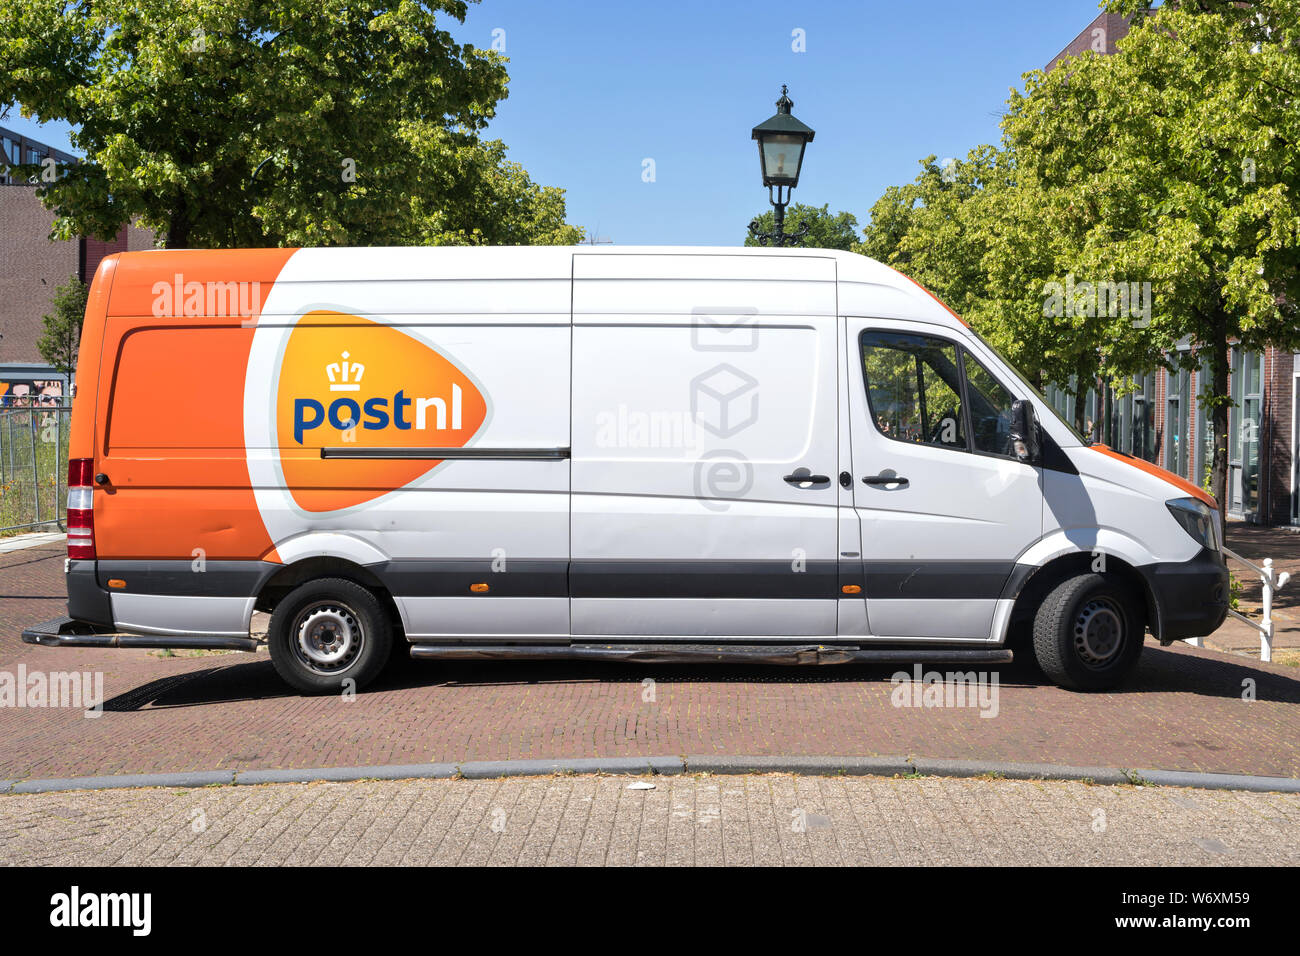 PostNL delivery van. PostNL is a mail, parcel and e-commerce corporation with operations in the Netherlands, Germany, Italy, Belgium, and the U. Stock Photo